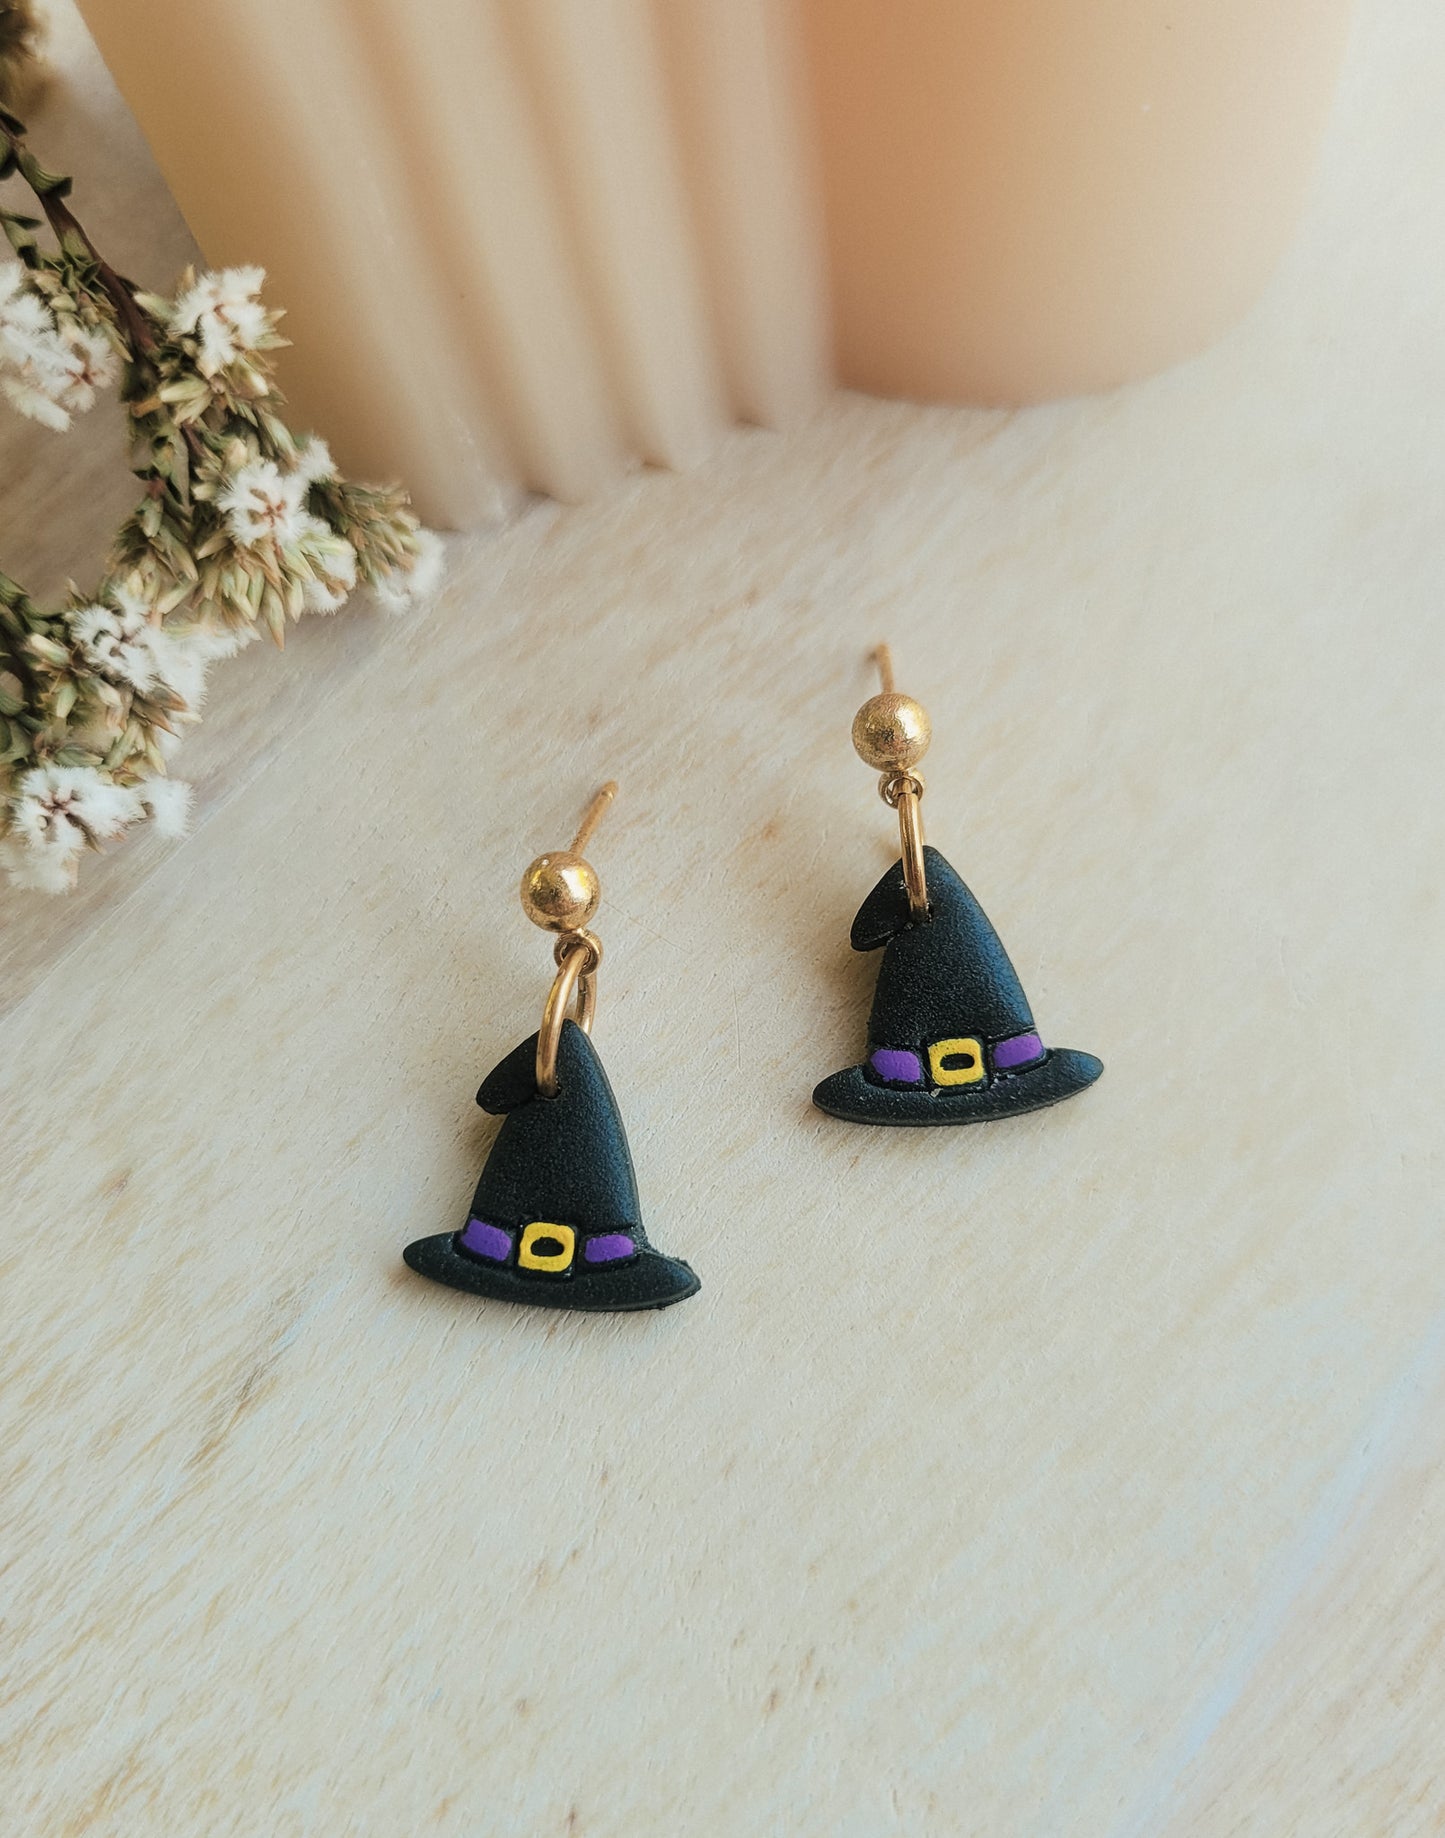 Witch's Hats